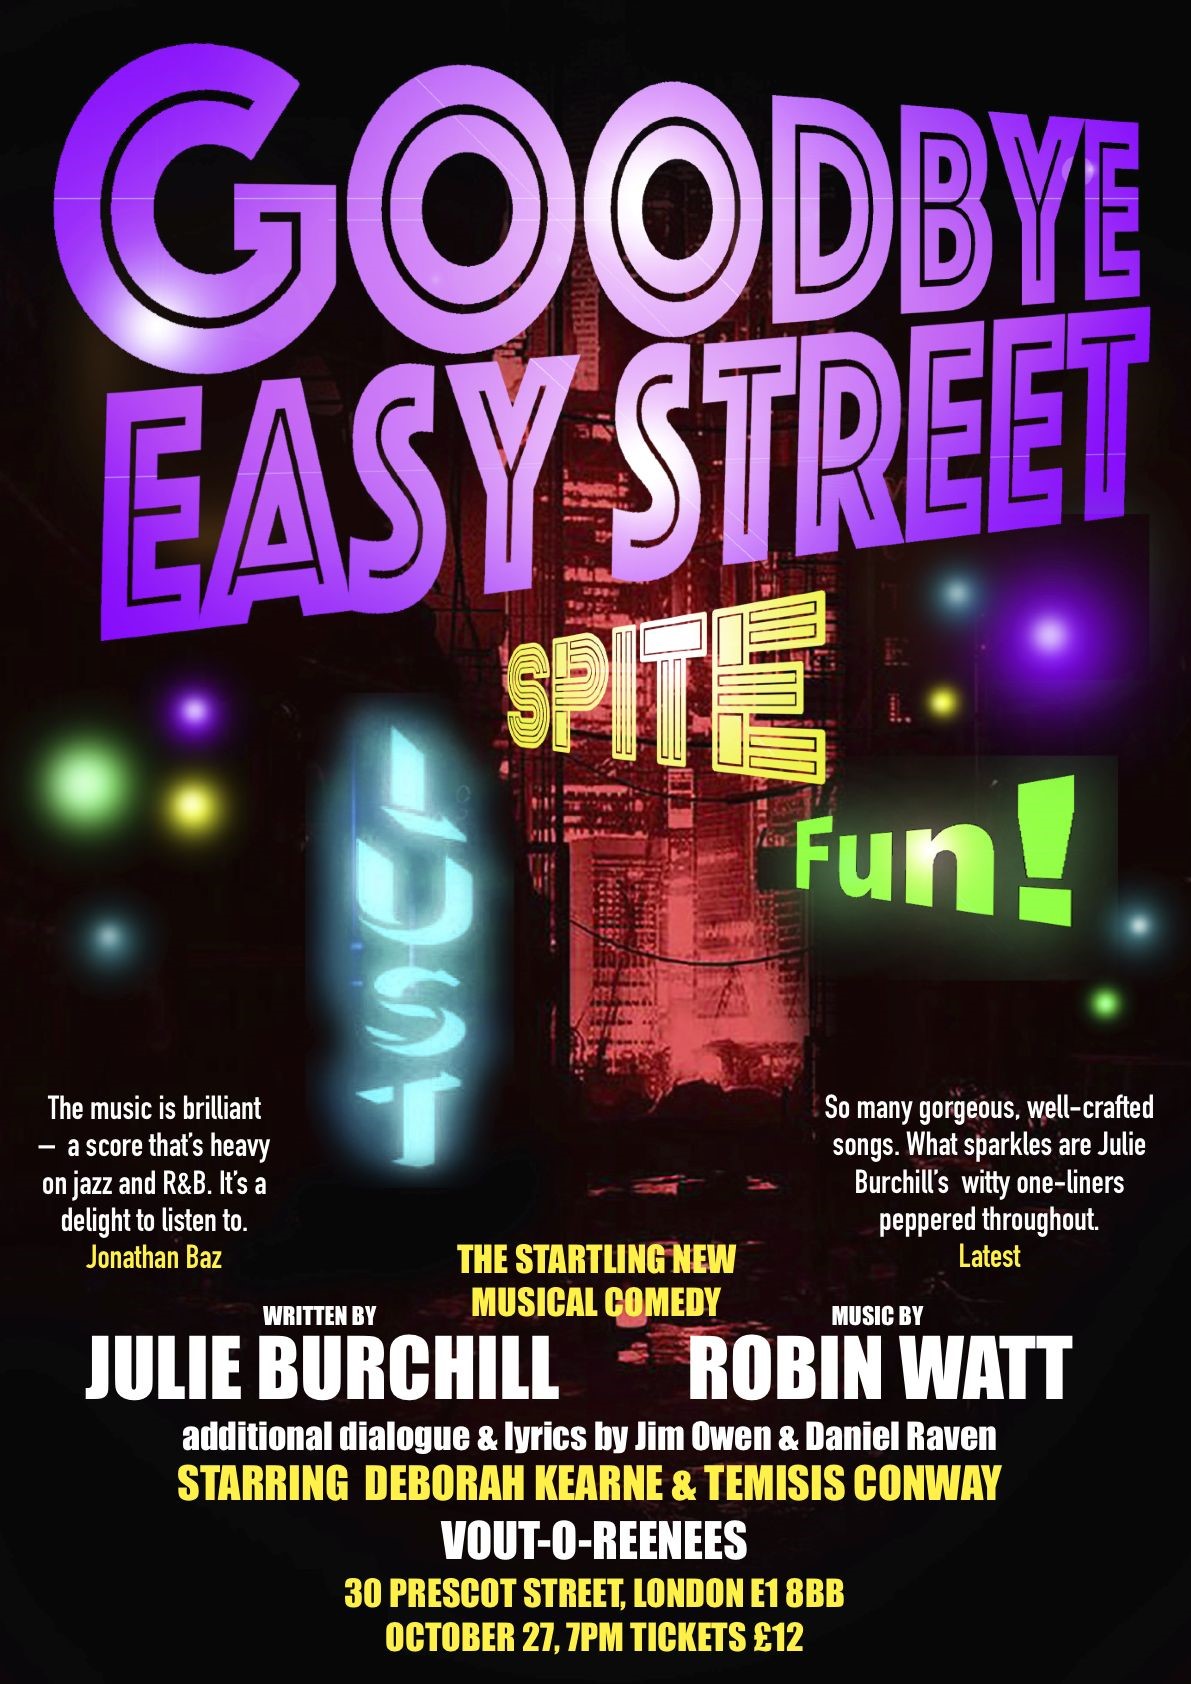 Goodbye Easy Street - A Musical comedy by Julie Burchill